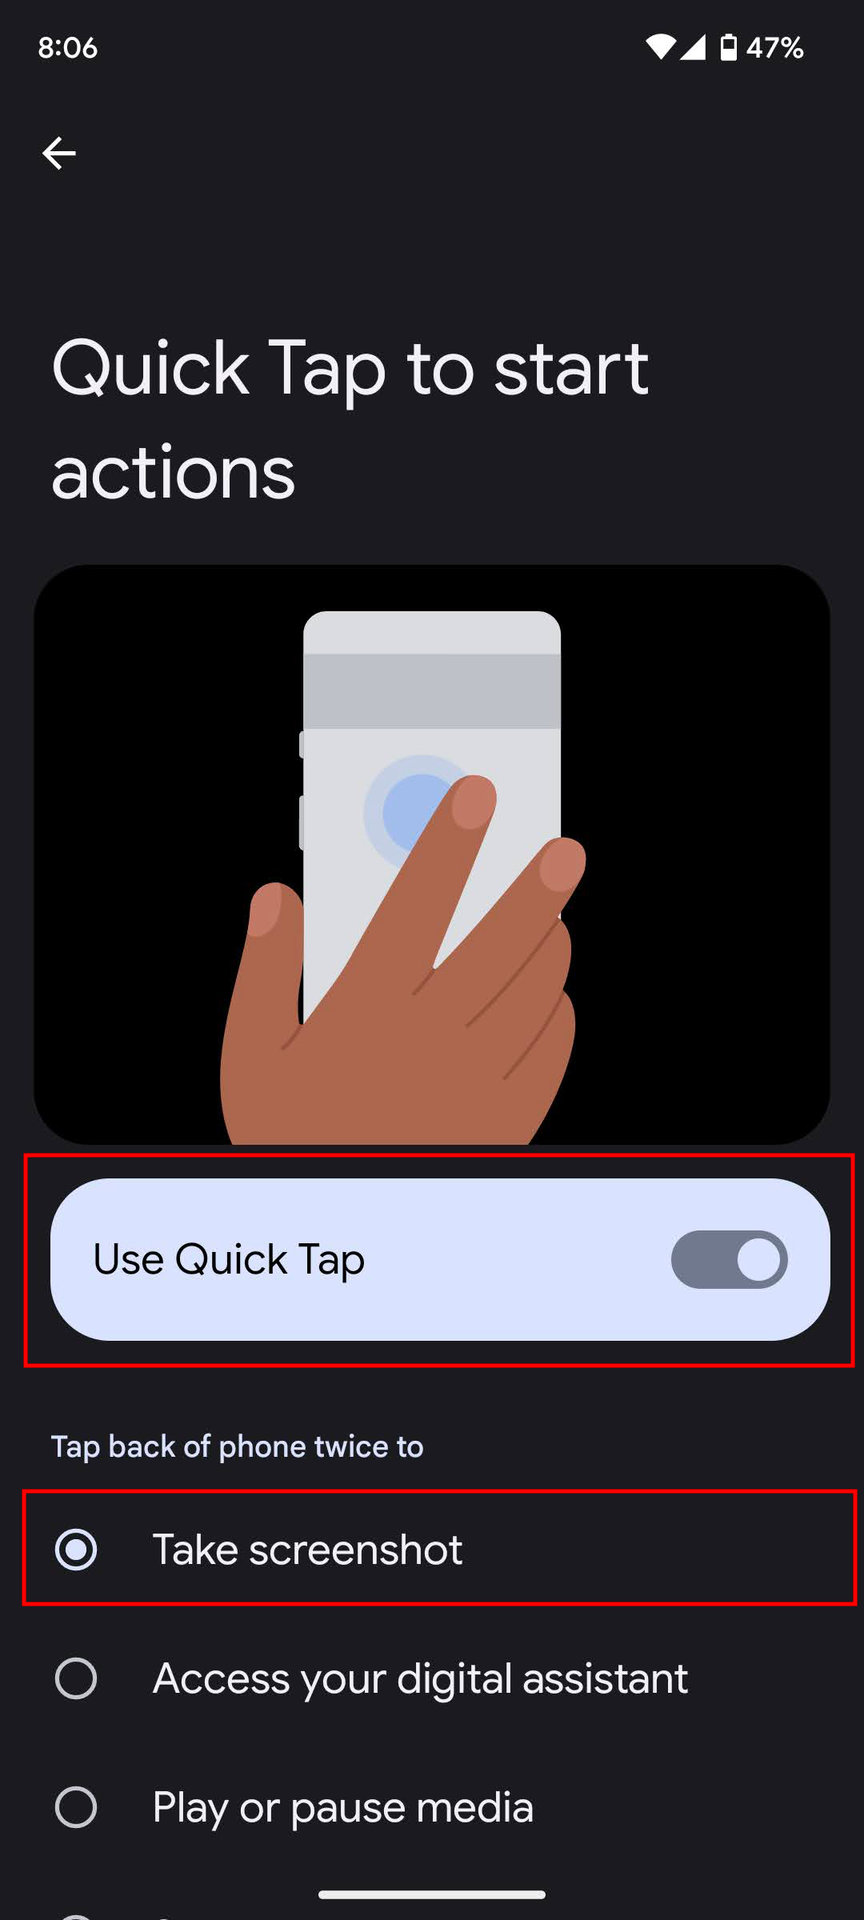 How to take a screenshot using the Quick Tap feature (4)